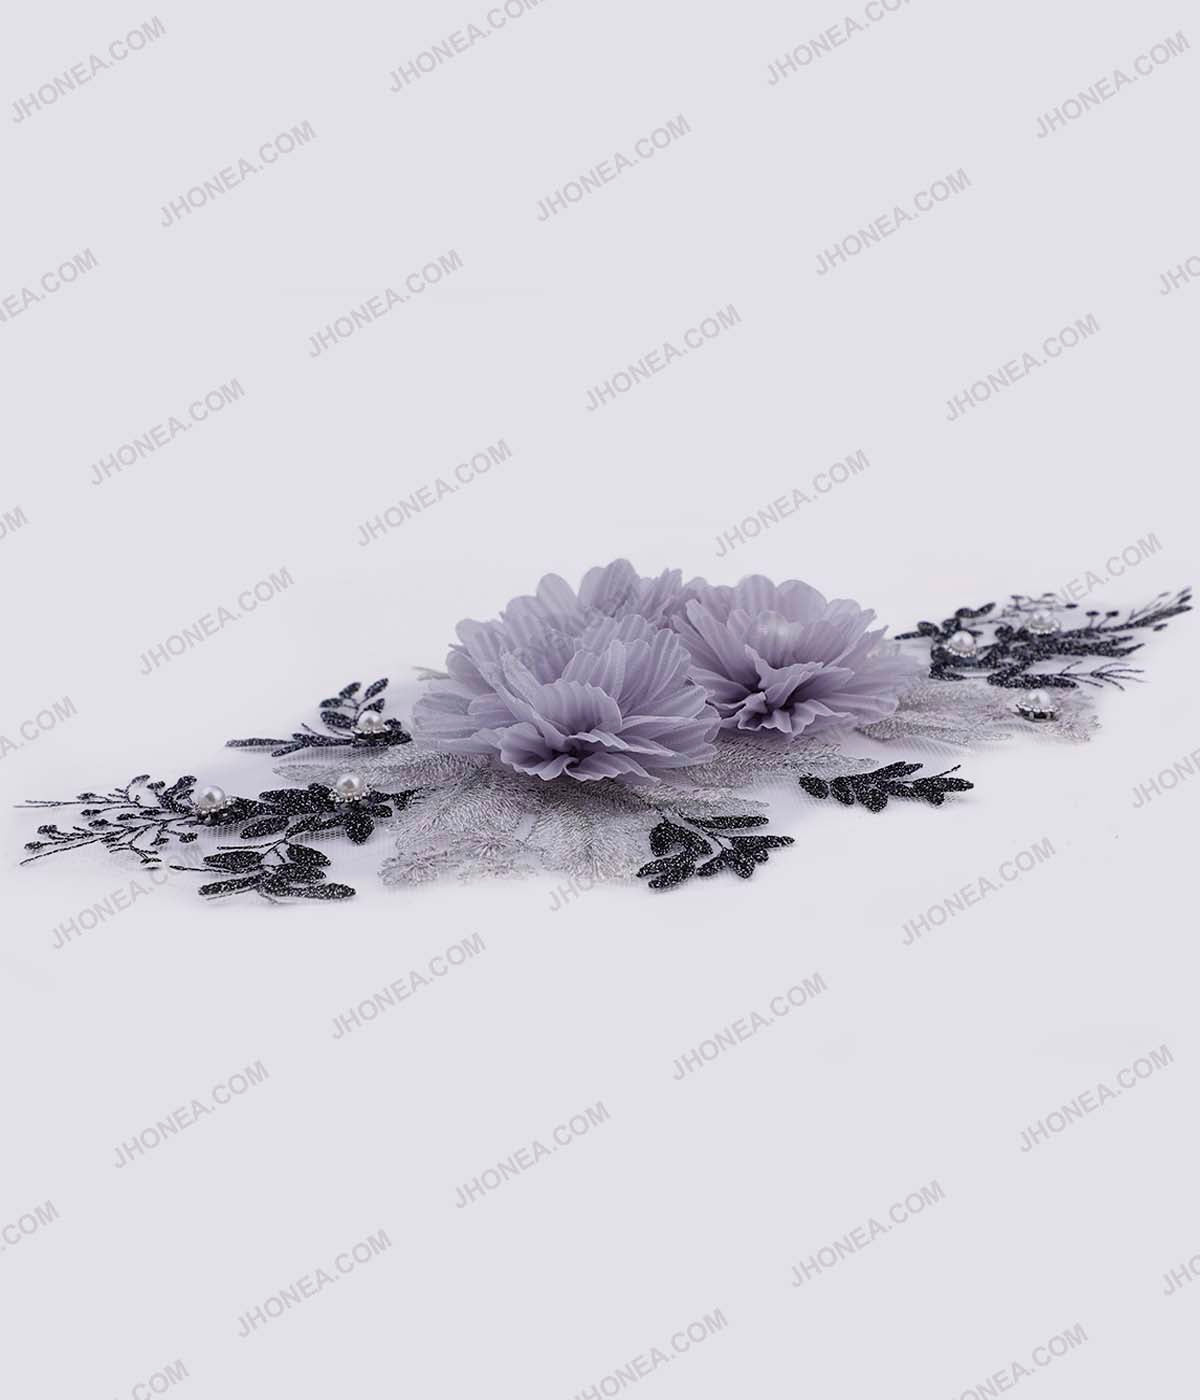 Decorative Floral Patches for Designer Baby Frocks & Bridal Gowns